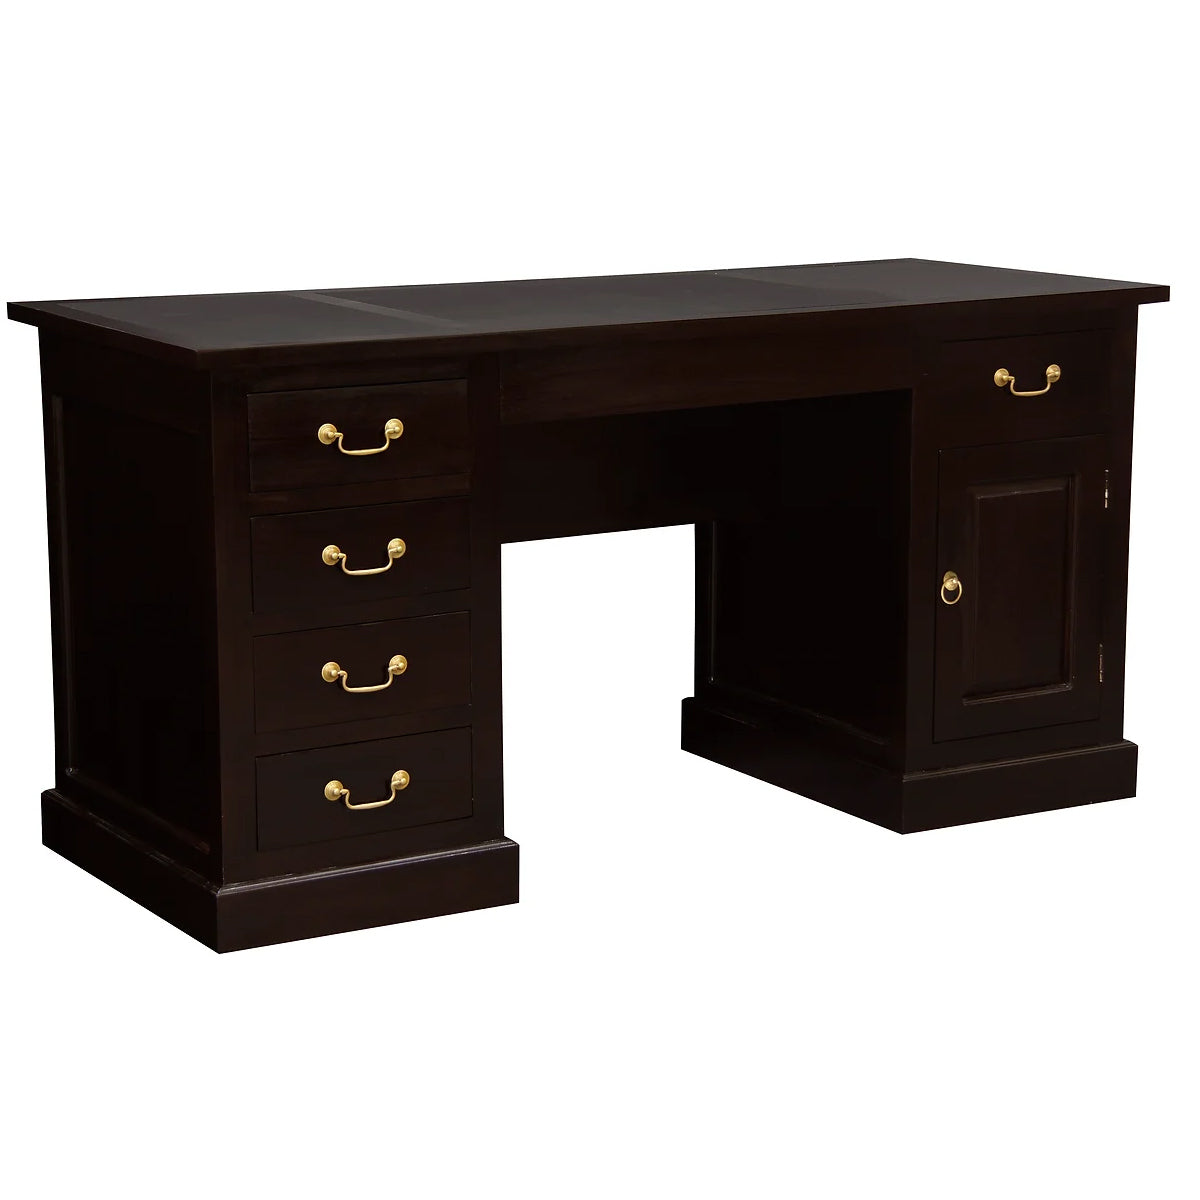 Tasmania Timber Desk with Faux Leather Top - Chocolate - Notbrand